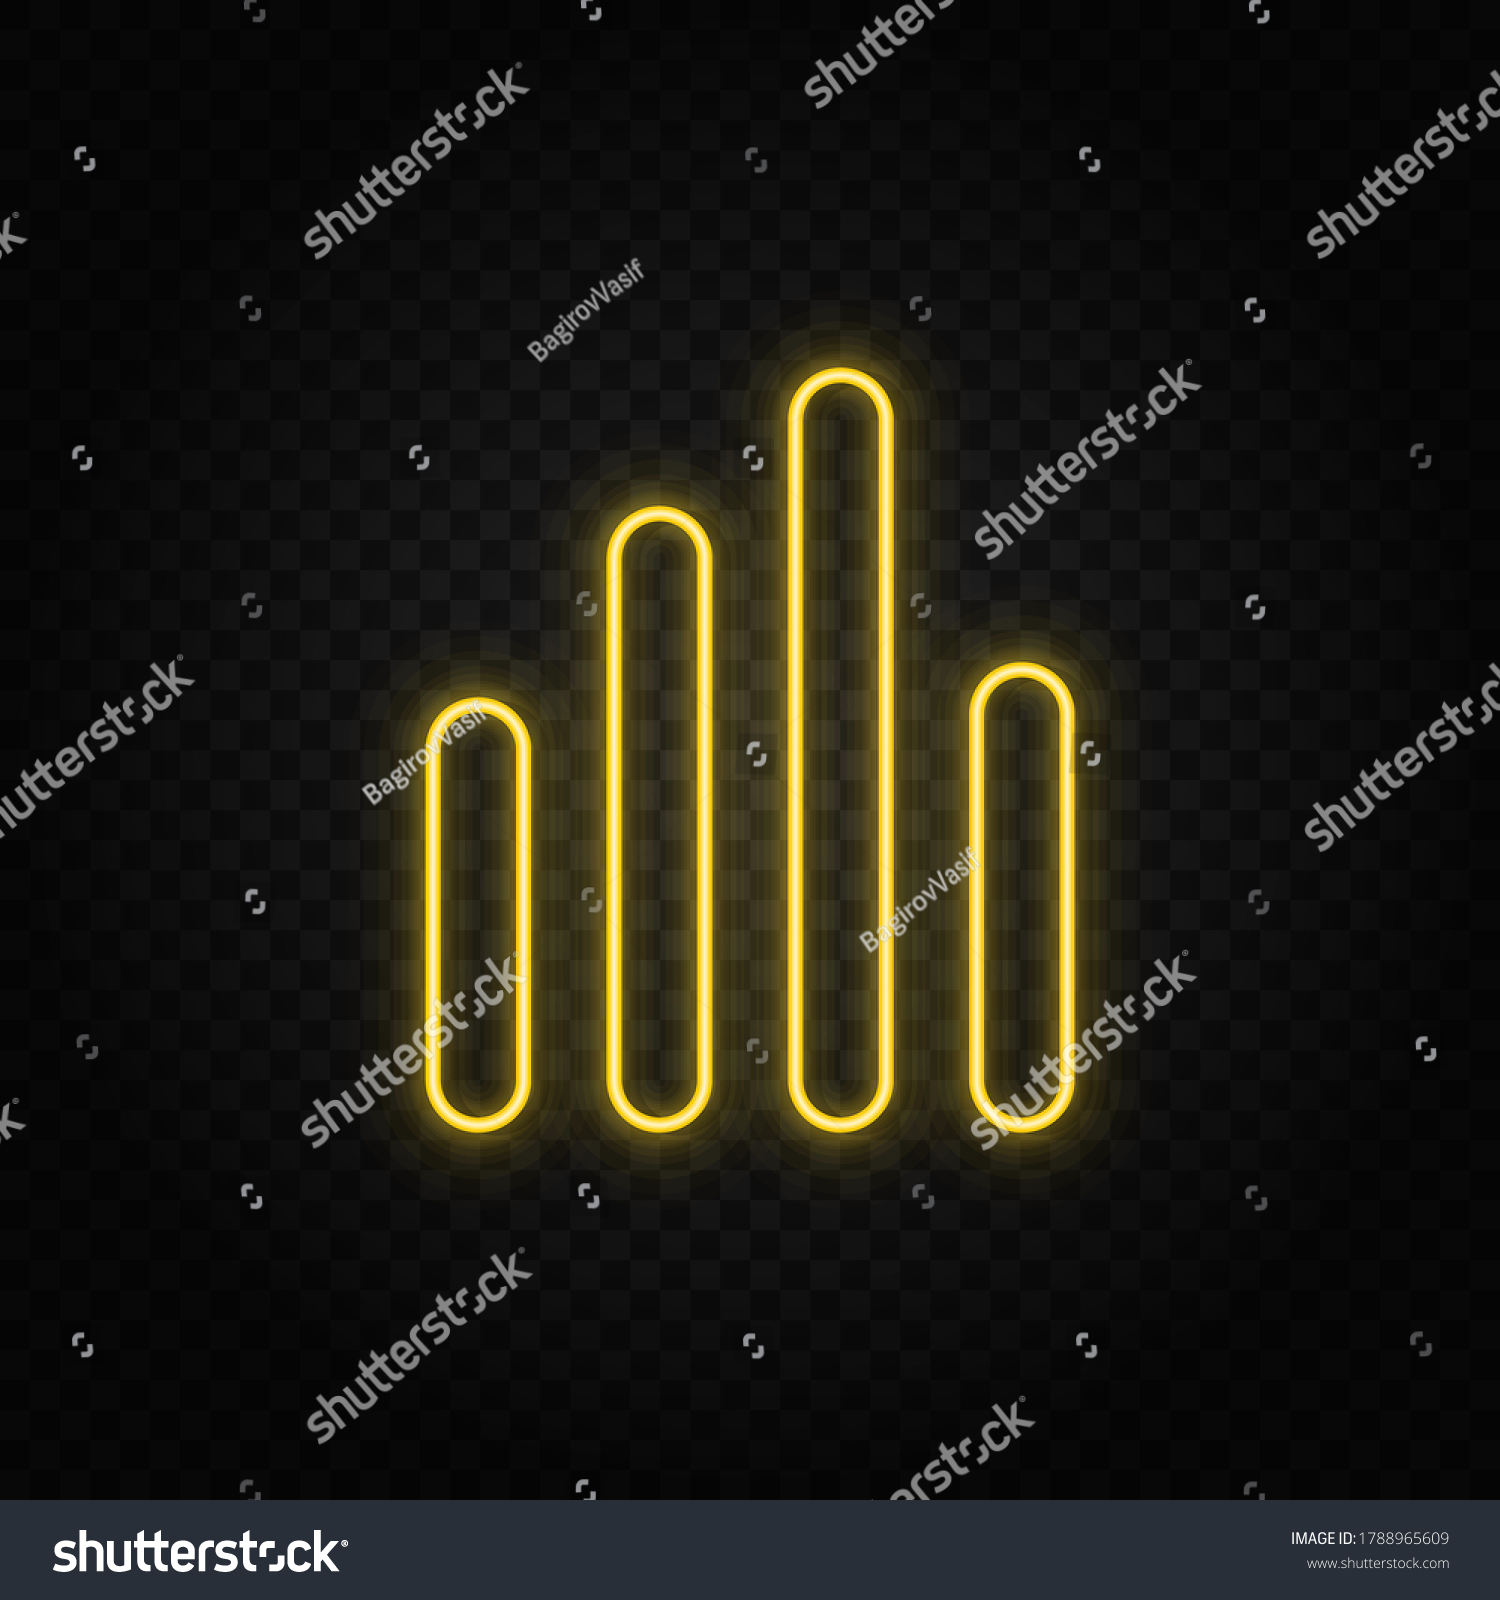 SVG of analytics, bar chart yellow neon icon .Transparent background. Yellow neon vector icon svg